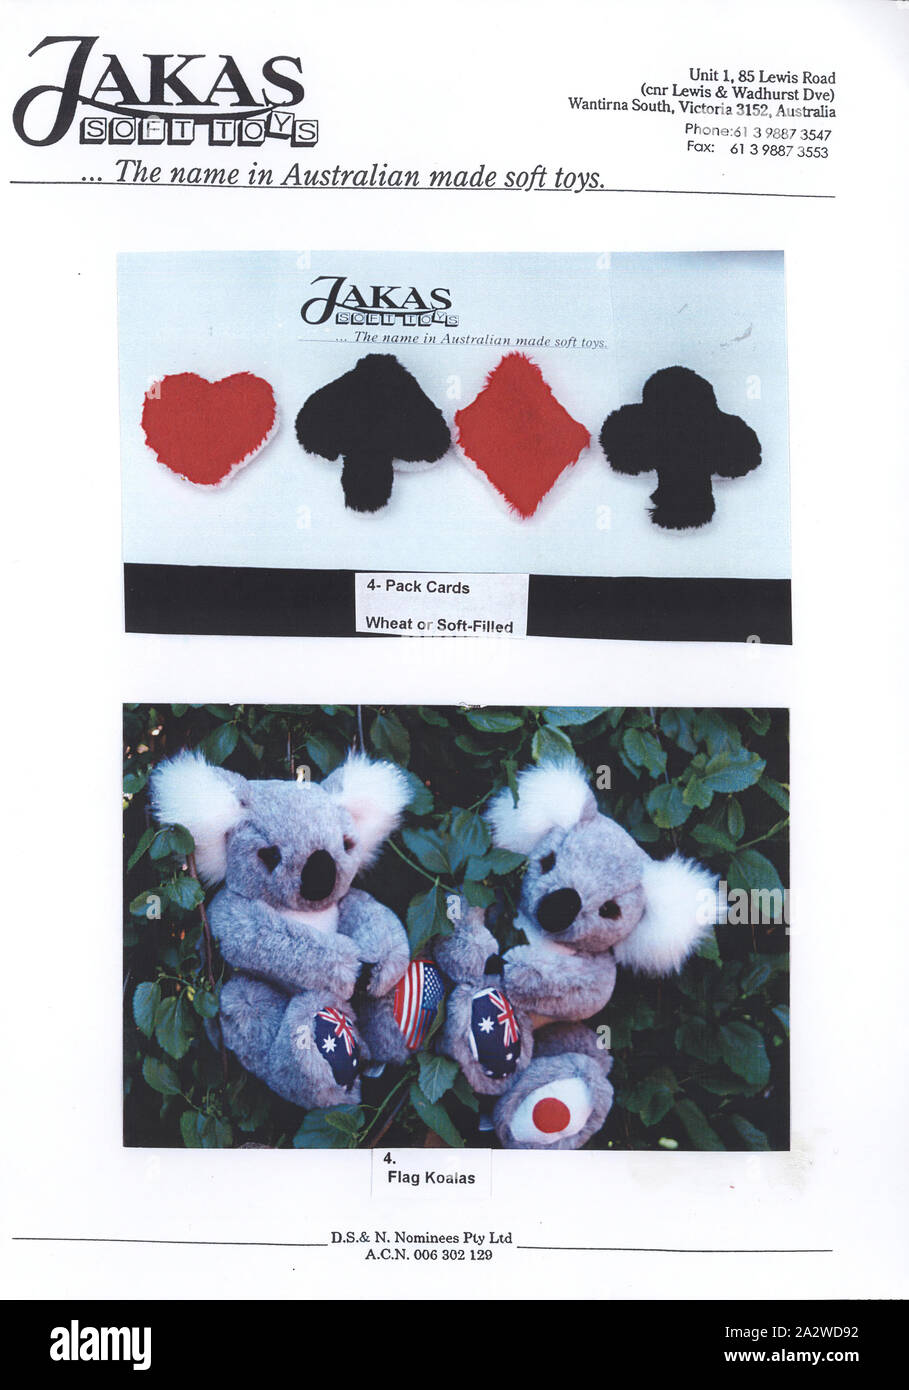 Advertising Flyer - Jakas Soft Toys, Playing Card Suits & Flag Koalas, Melbourne, 1997, A single page advertising flyer showing the playing card suits, Hearts, Spades, Diamonds and Clubs, designed as wheat bags and soft toys and two koala soft toys, known as the 'Flag Koalas'. Jakas Soft Toys was a Melbourne-based company which designed and manufactured genuine high quality soft toys from 1956. Their range included teddy bears, golliwogs and Australian native animals. Jakas Soft Stock Photo